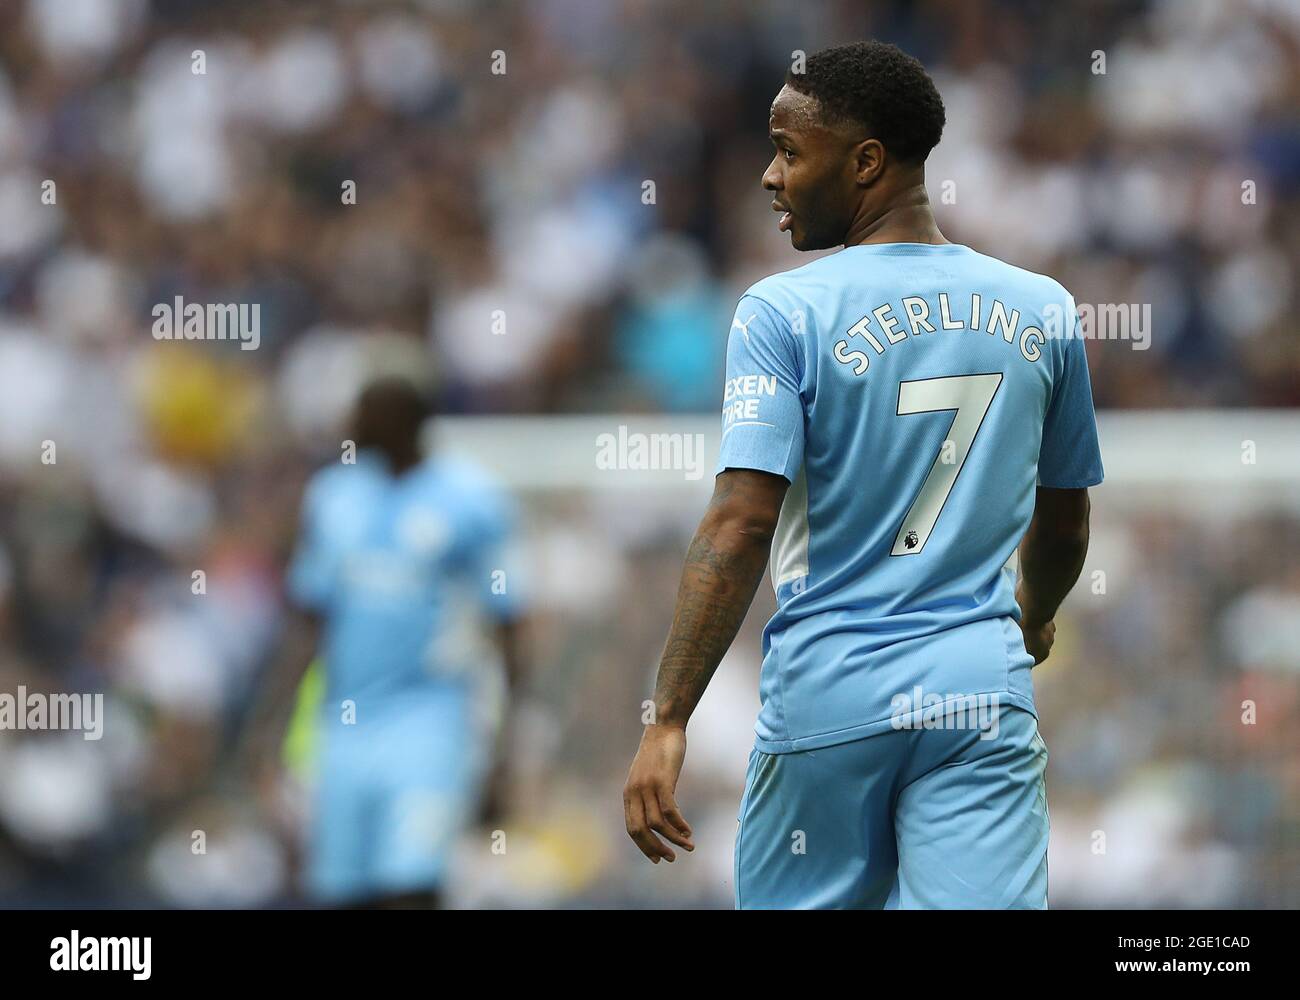 London, England, 15th August 2021. Raheem Sterling of Manchester City during the Premier League match at the Tottenham Hotspur Stadium, London. Picture credit should read: Paul Terry / Sportimage Credit: Sportimage/Alamy Live News Stock Photo